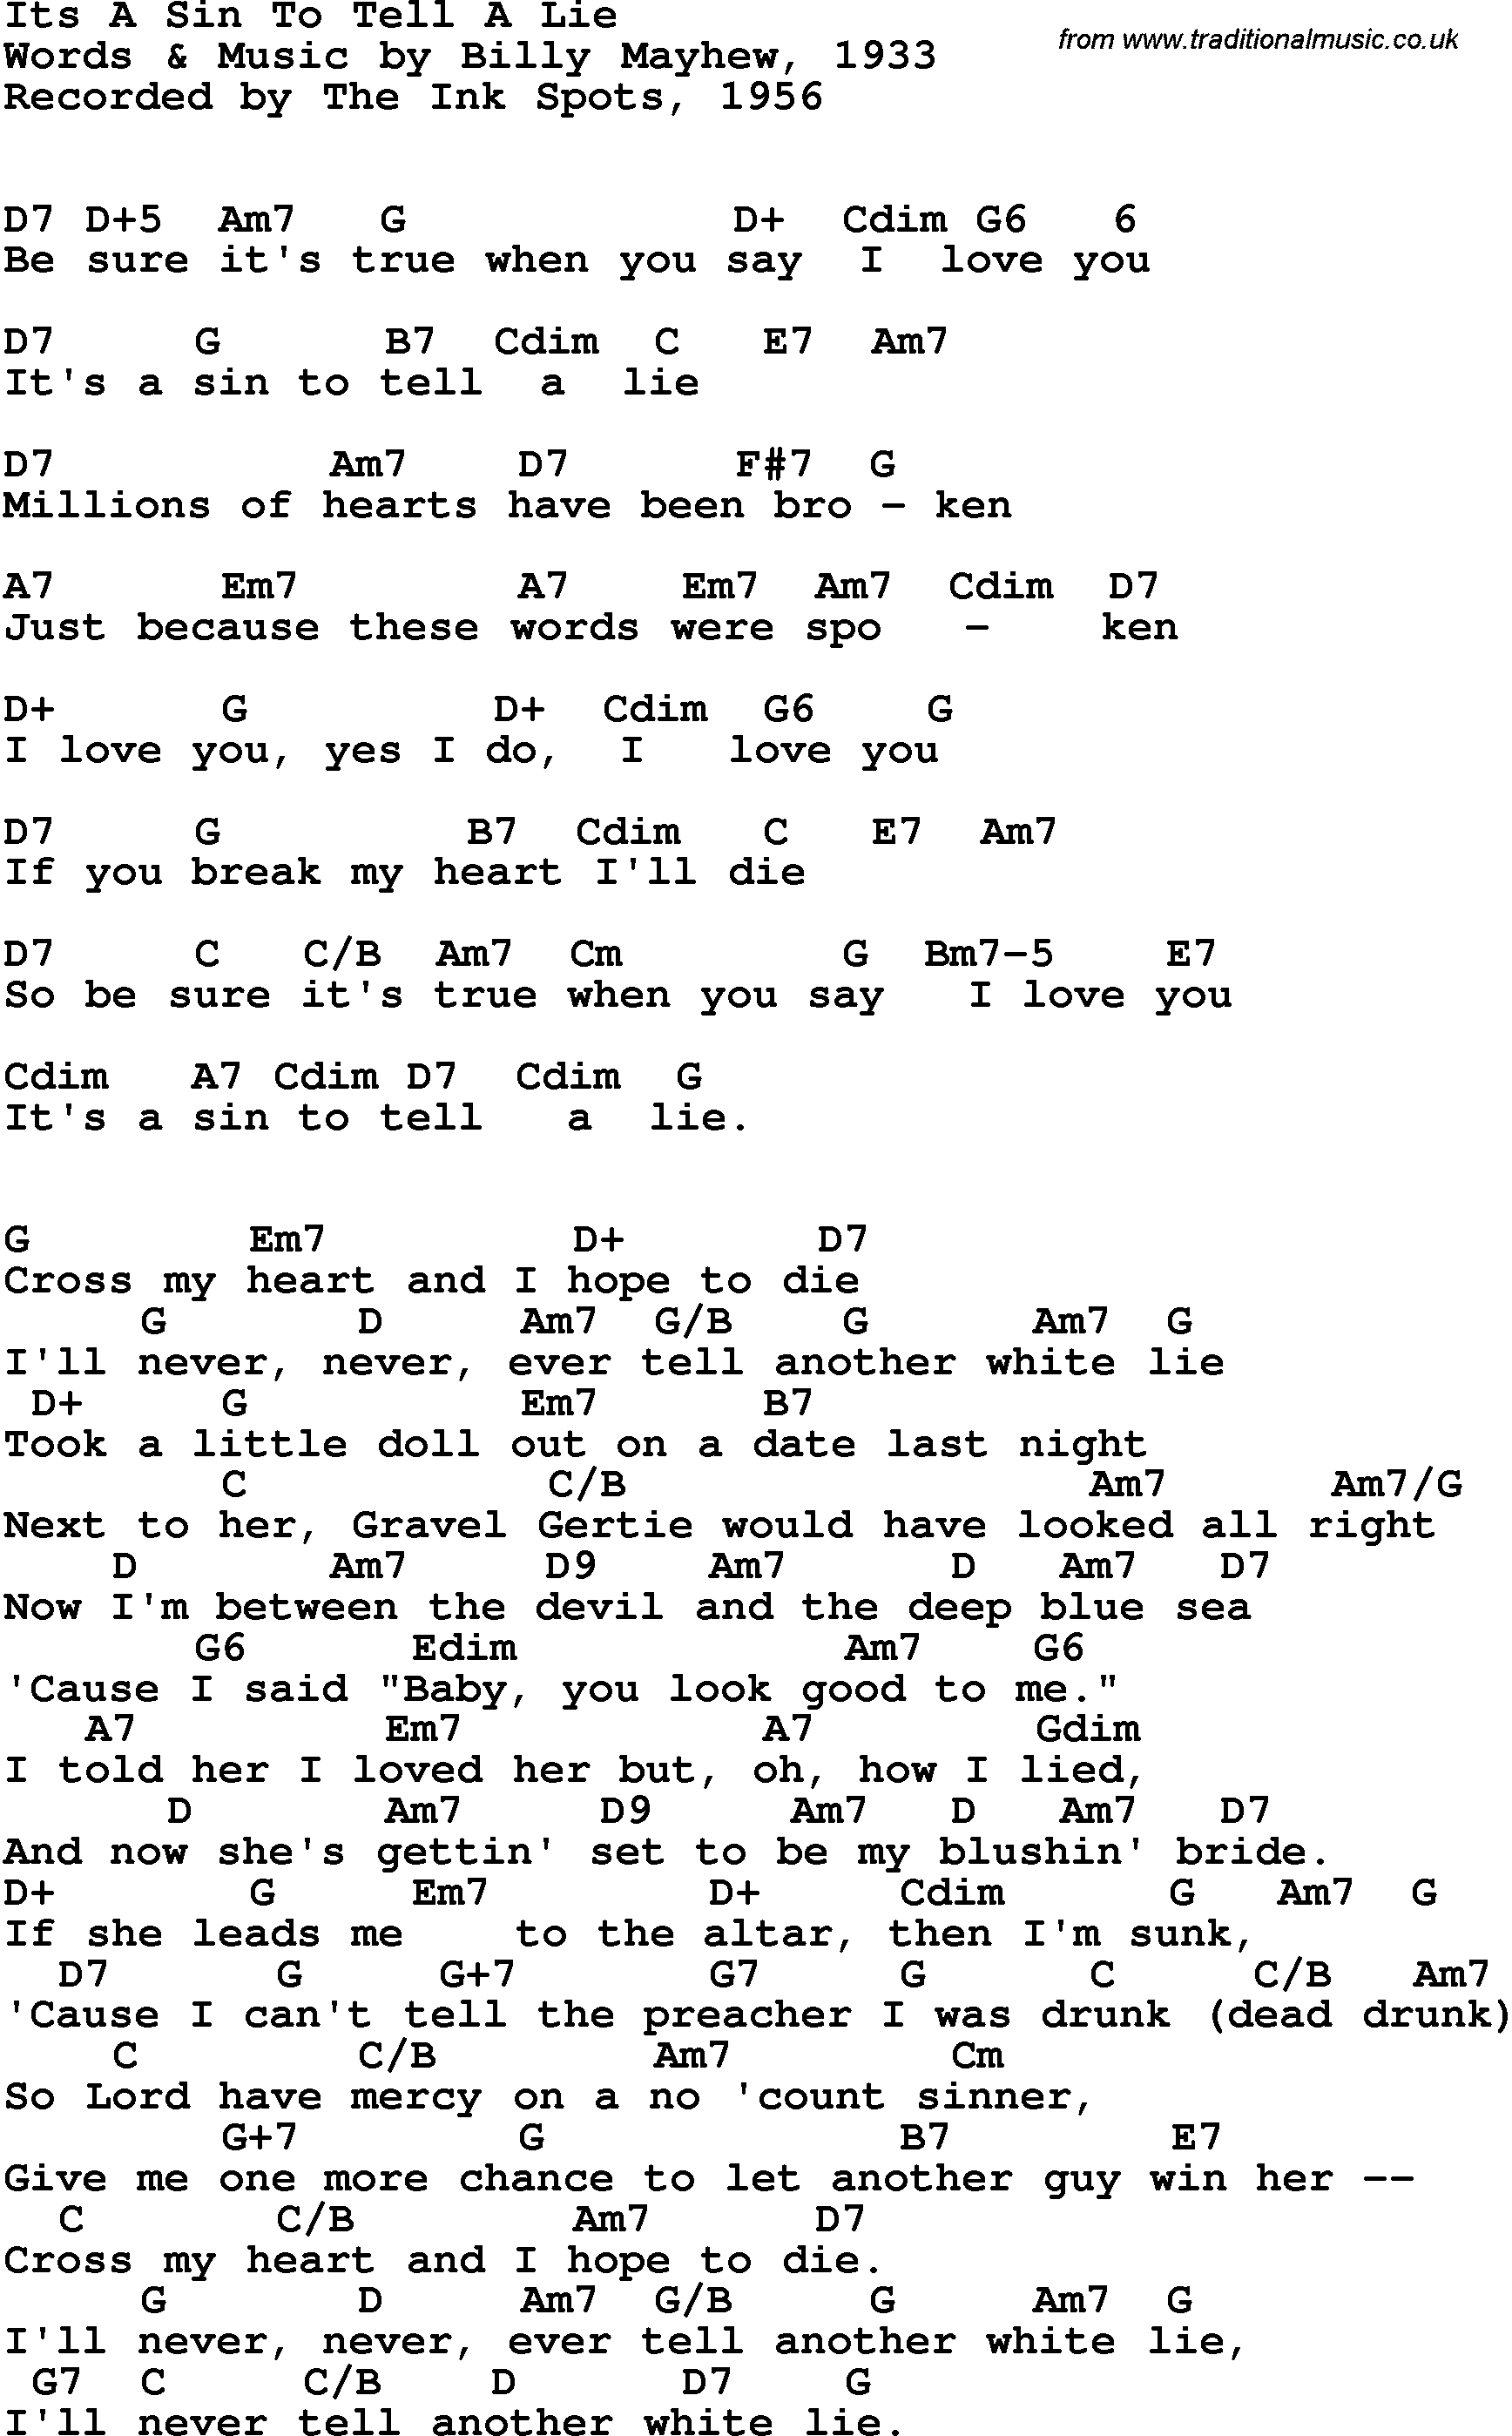 Song Lyrics with guitar chords for It's A Sin To Tell A Lie - The Ink Spots, 1956